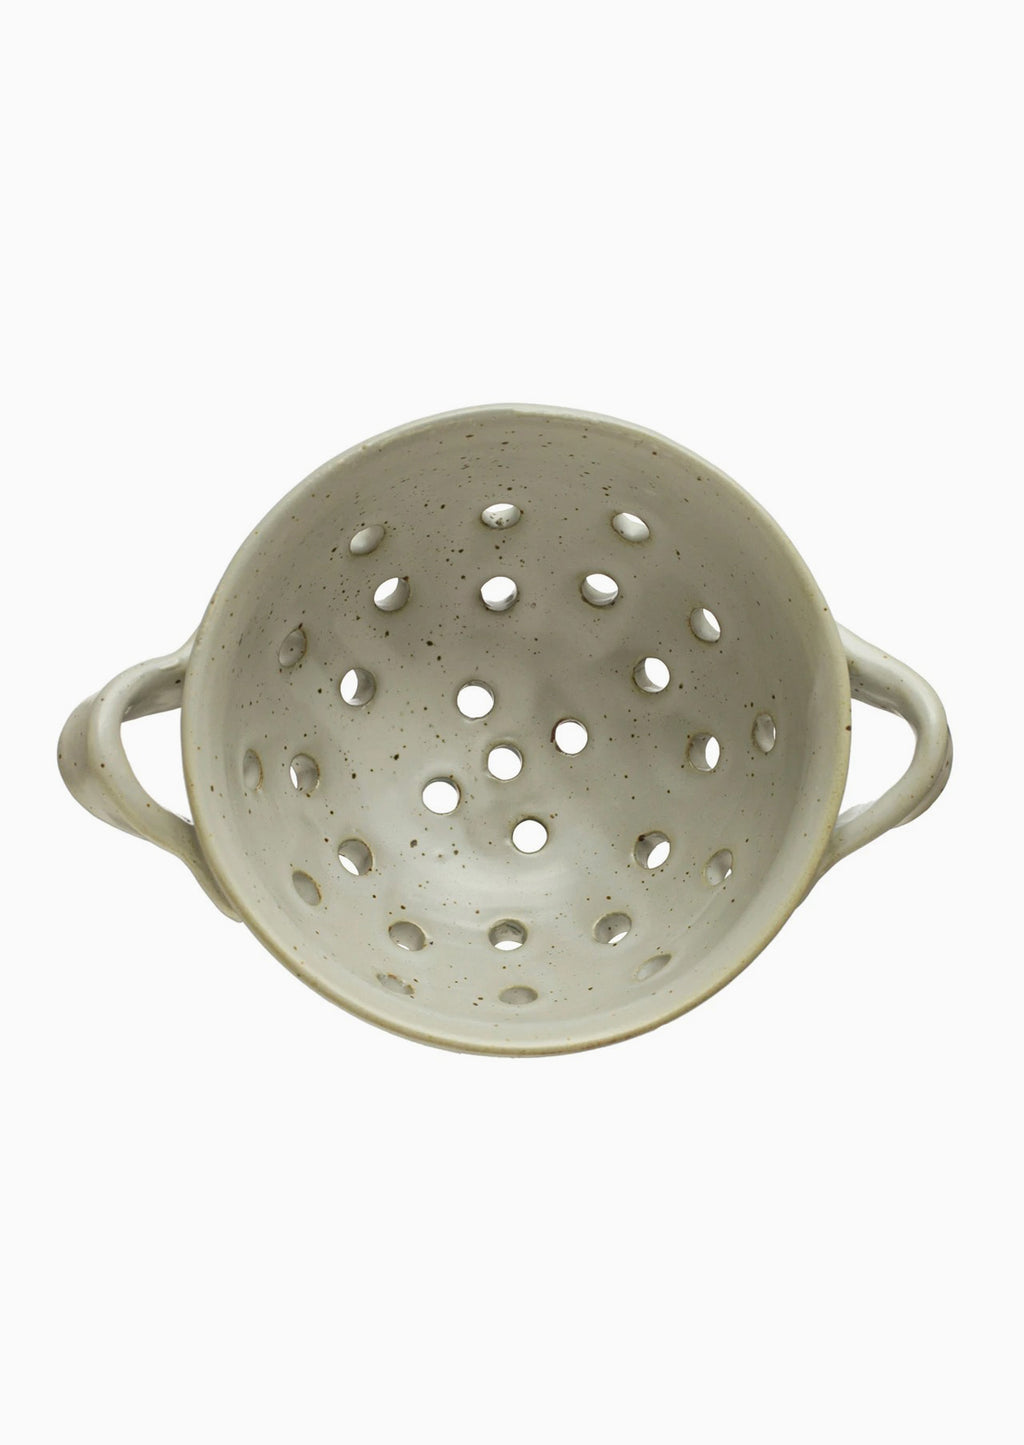 3: A small speckled ceramic berry colander with side handles.